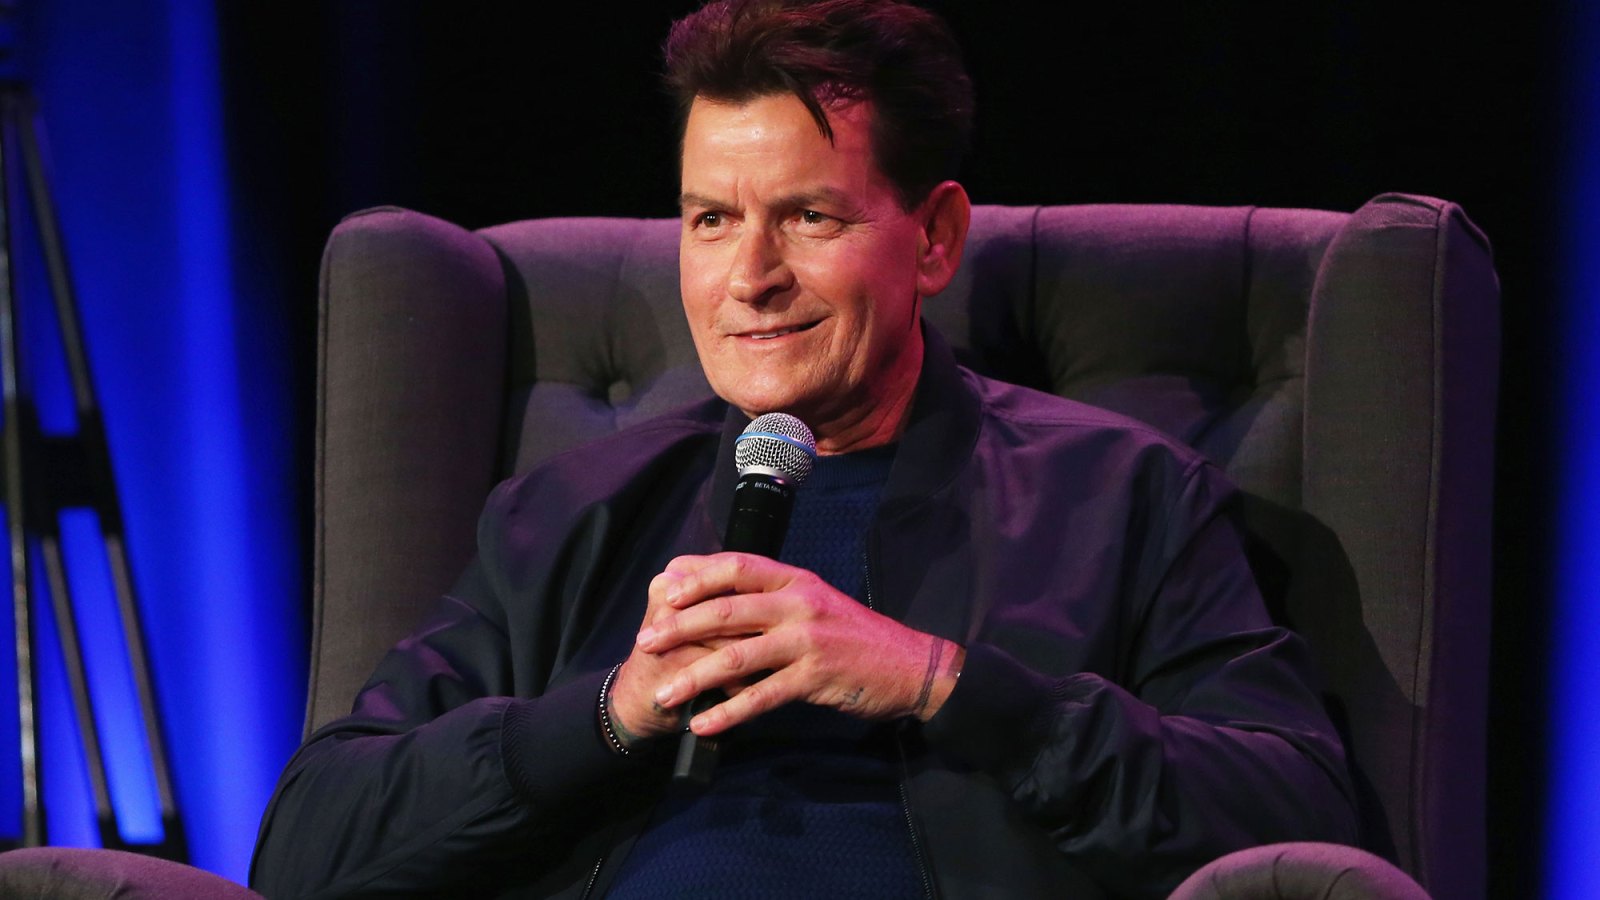 charlie sheen bomber jacket microphone chair